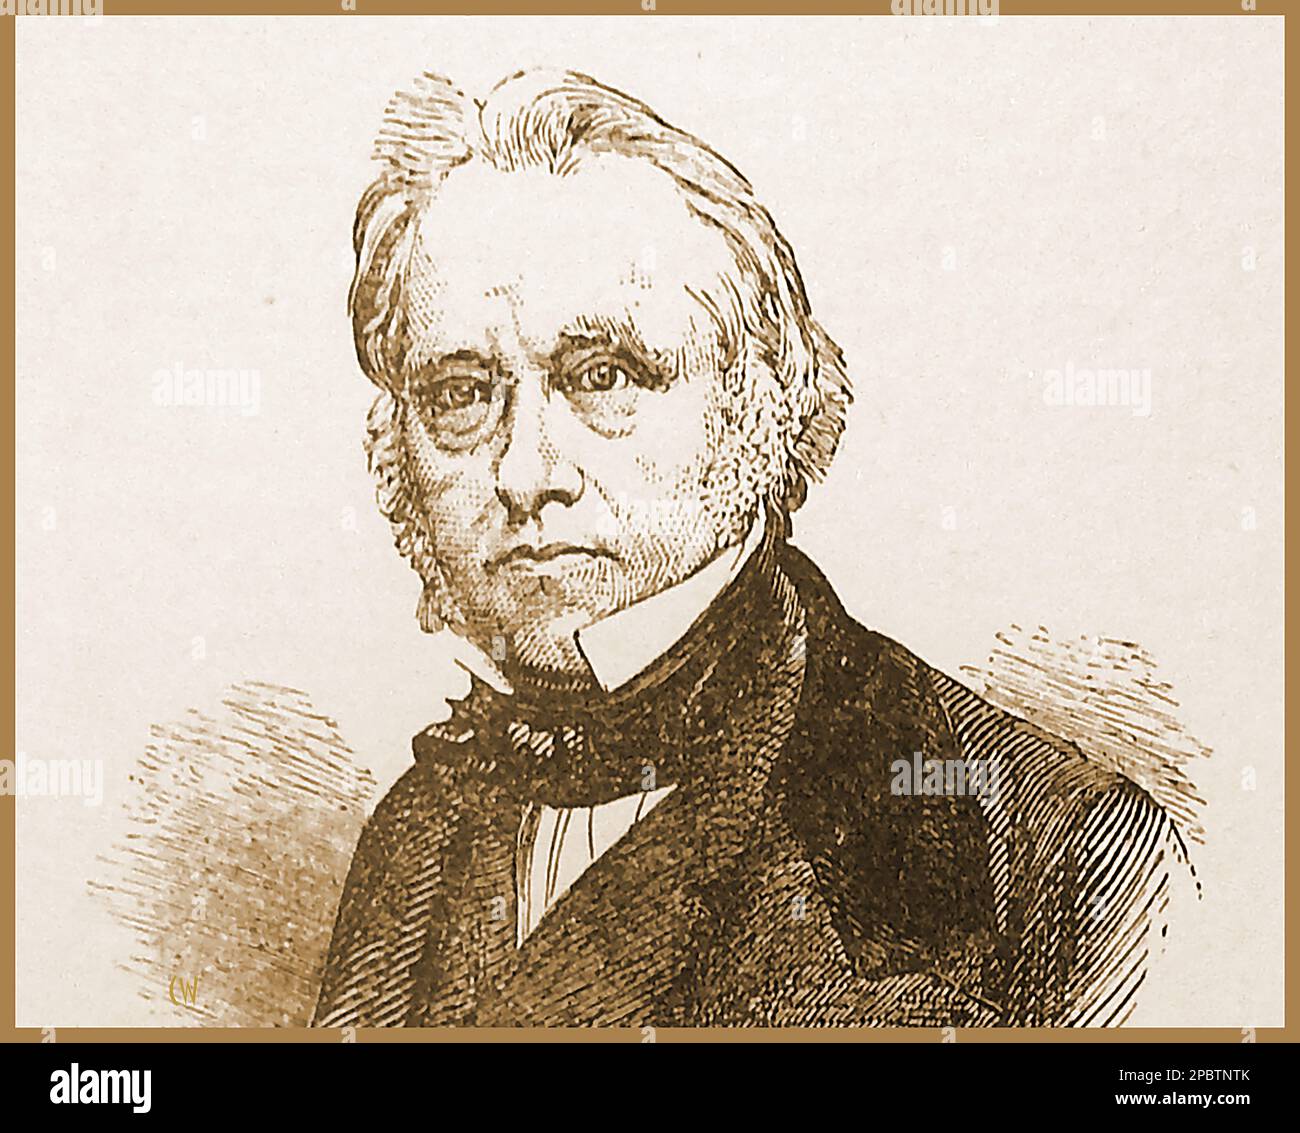 A 19th century engraving portrait of Thomas Babington Macaulay  (1800-1859), British historian and Whig politician, He was also known as 1st Baron Macaulay, Baron Macaulay, of Rothley and  Lord Macaulay. He served as  Secretary at War,  and Paymaster-General, Secretary to the Board of Control Stock Photo